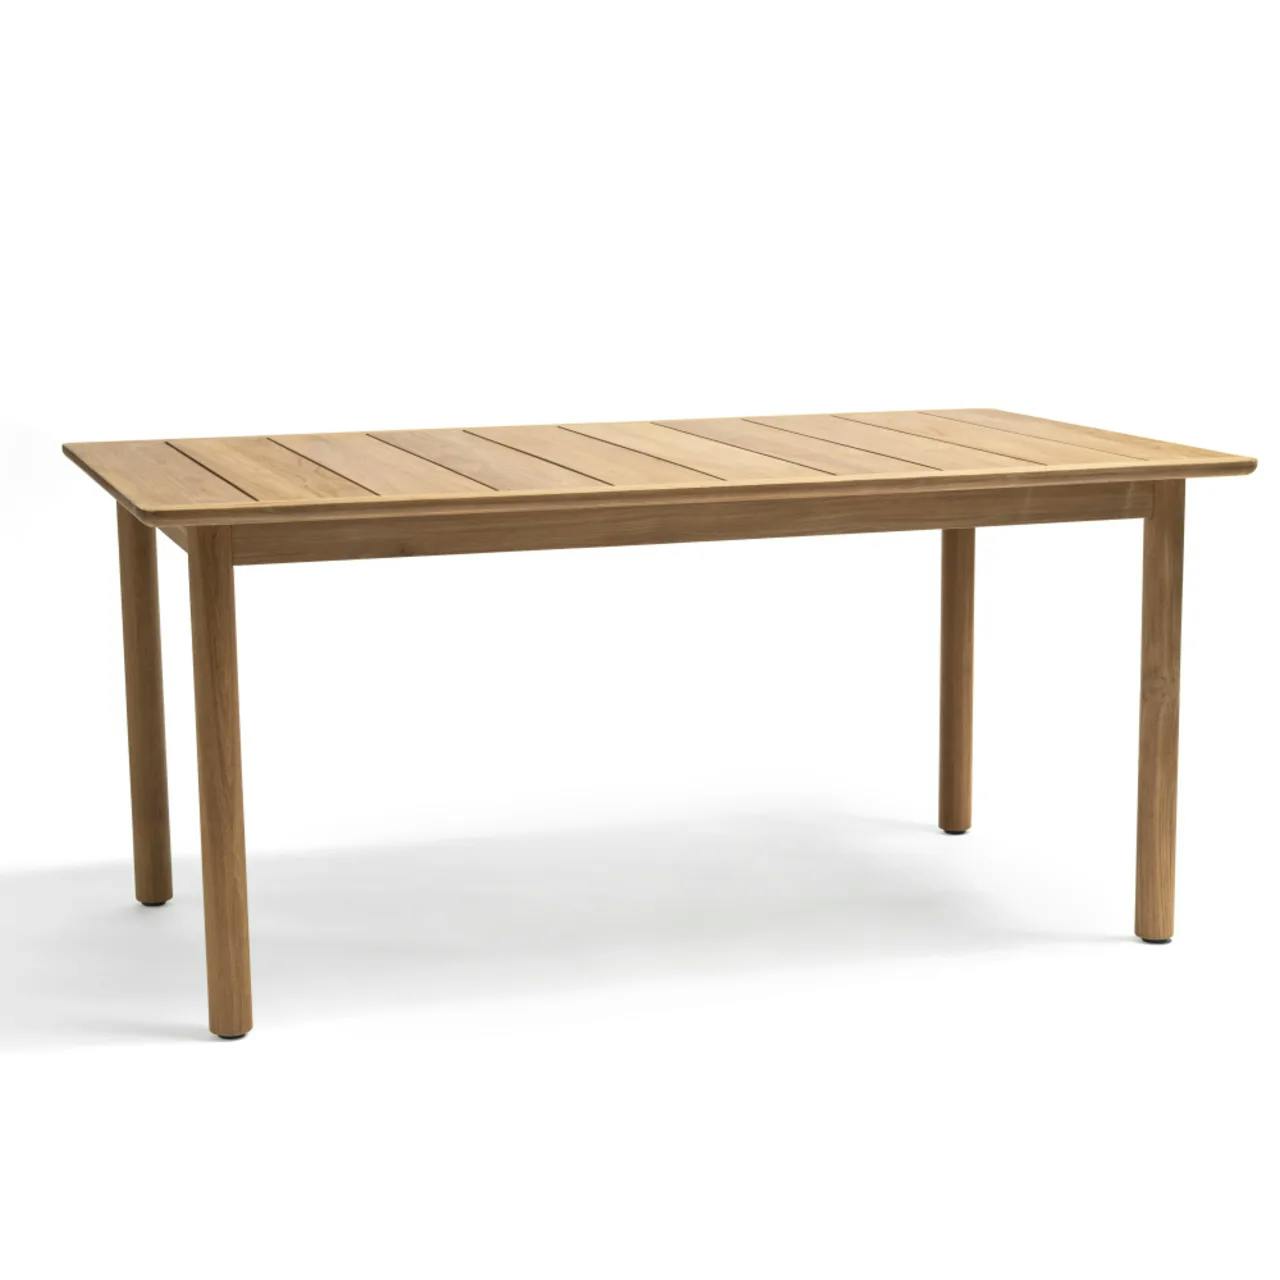 Frame and Table Top: Teak